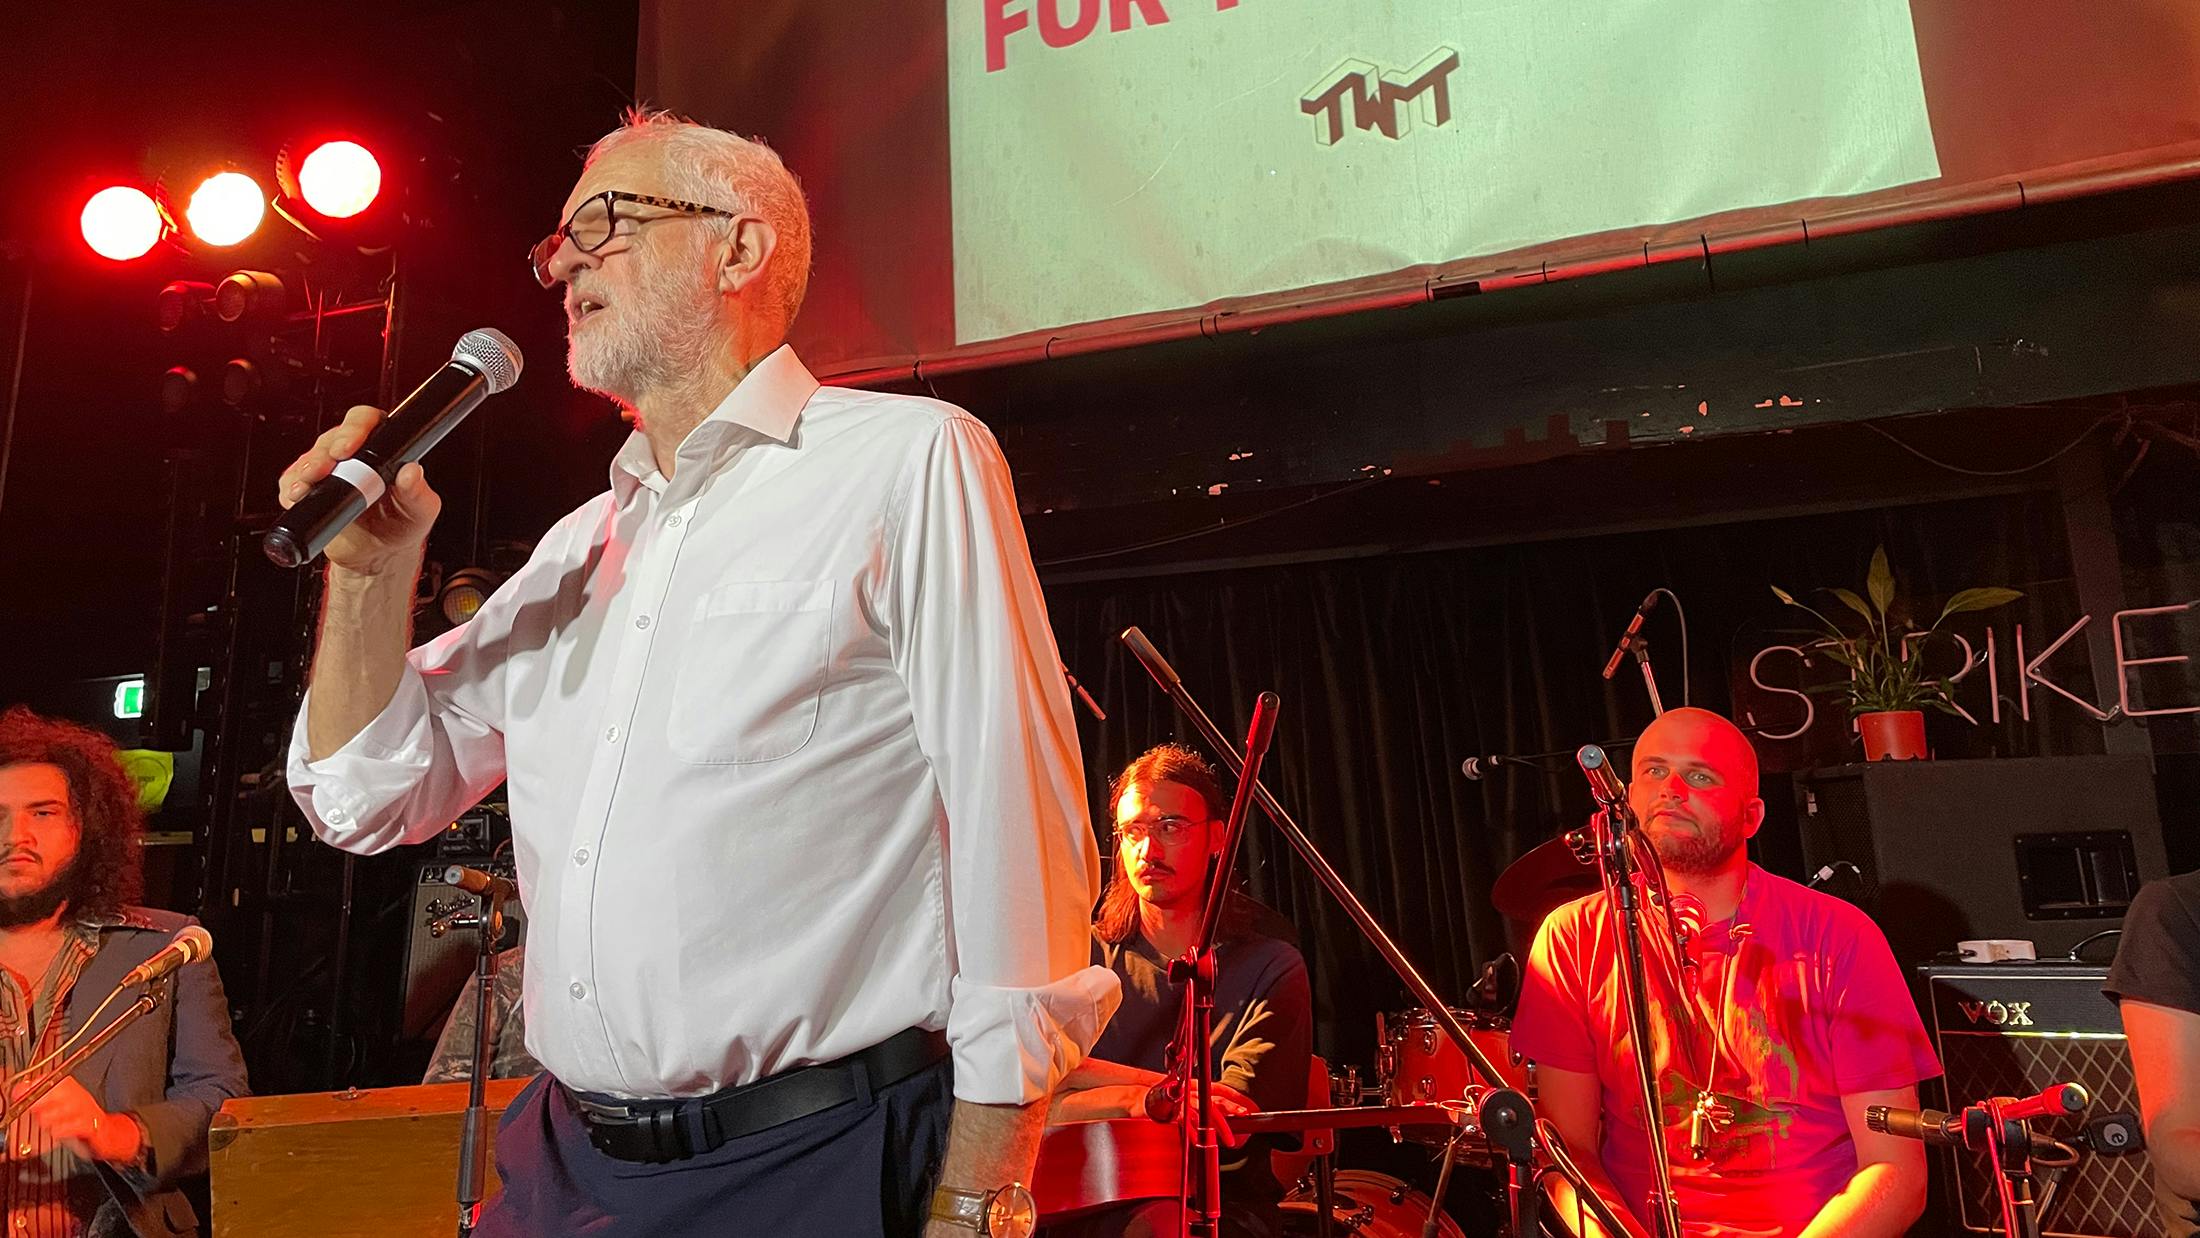 “The government must act now to protect grassroots music venues”: An open letter from Jeremy Corbyn